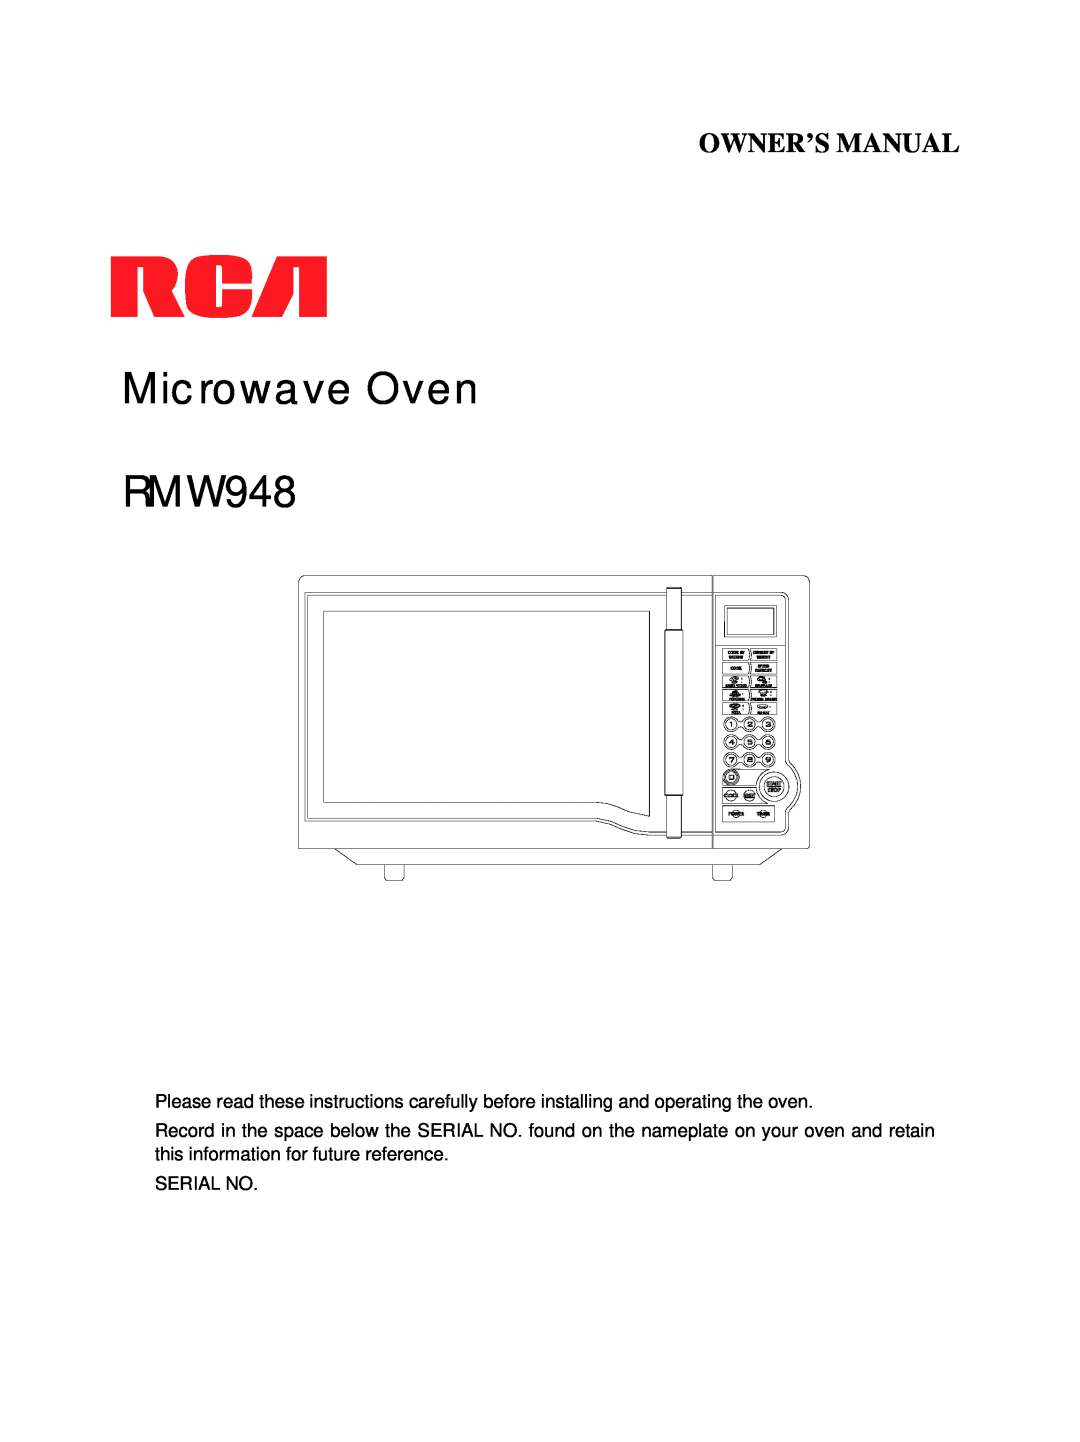 RCA owner manual Microwave Oven RMW948 